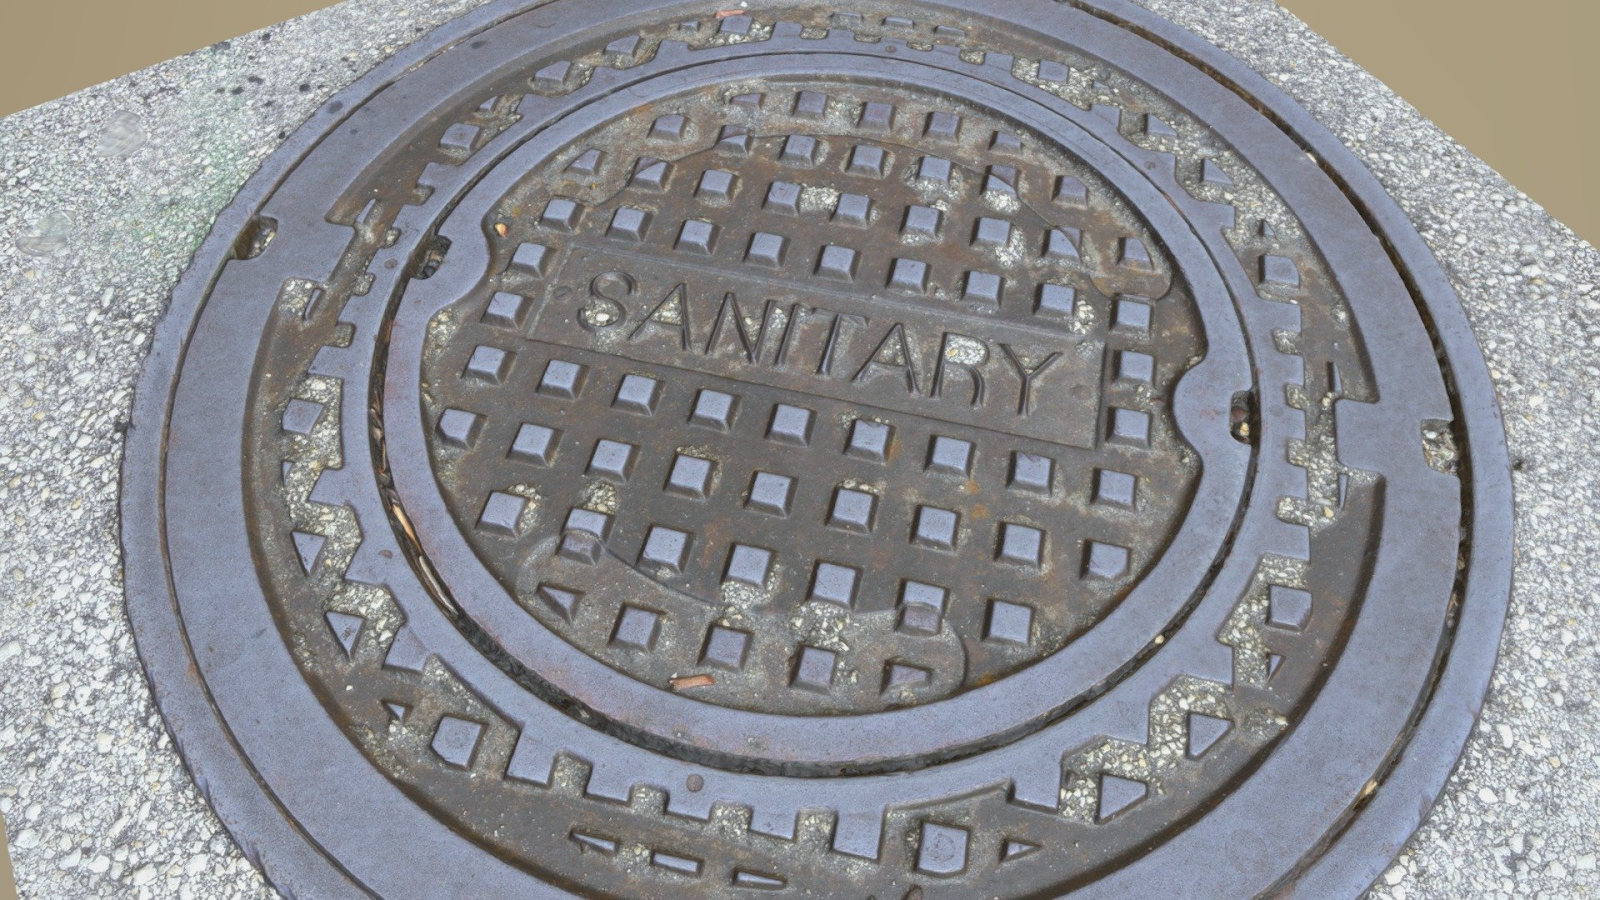 This is what a typical manhole tends to look like. They contribute to our sewer system everywhere.